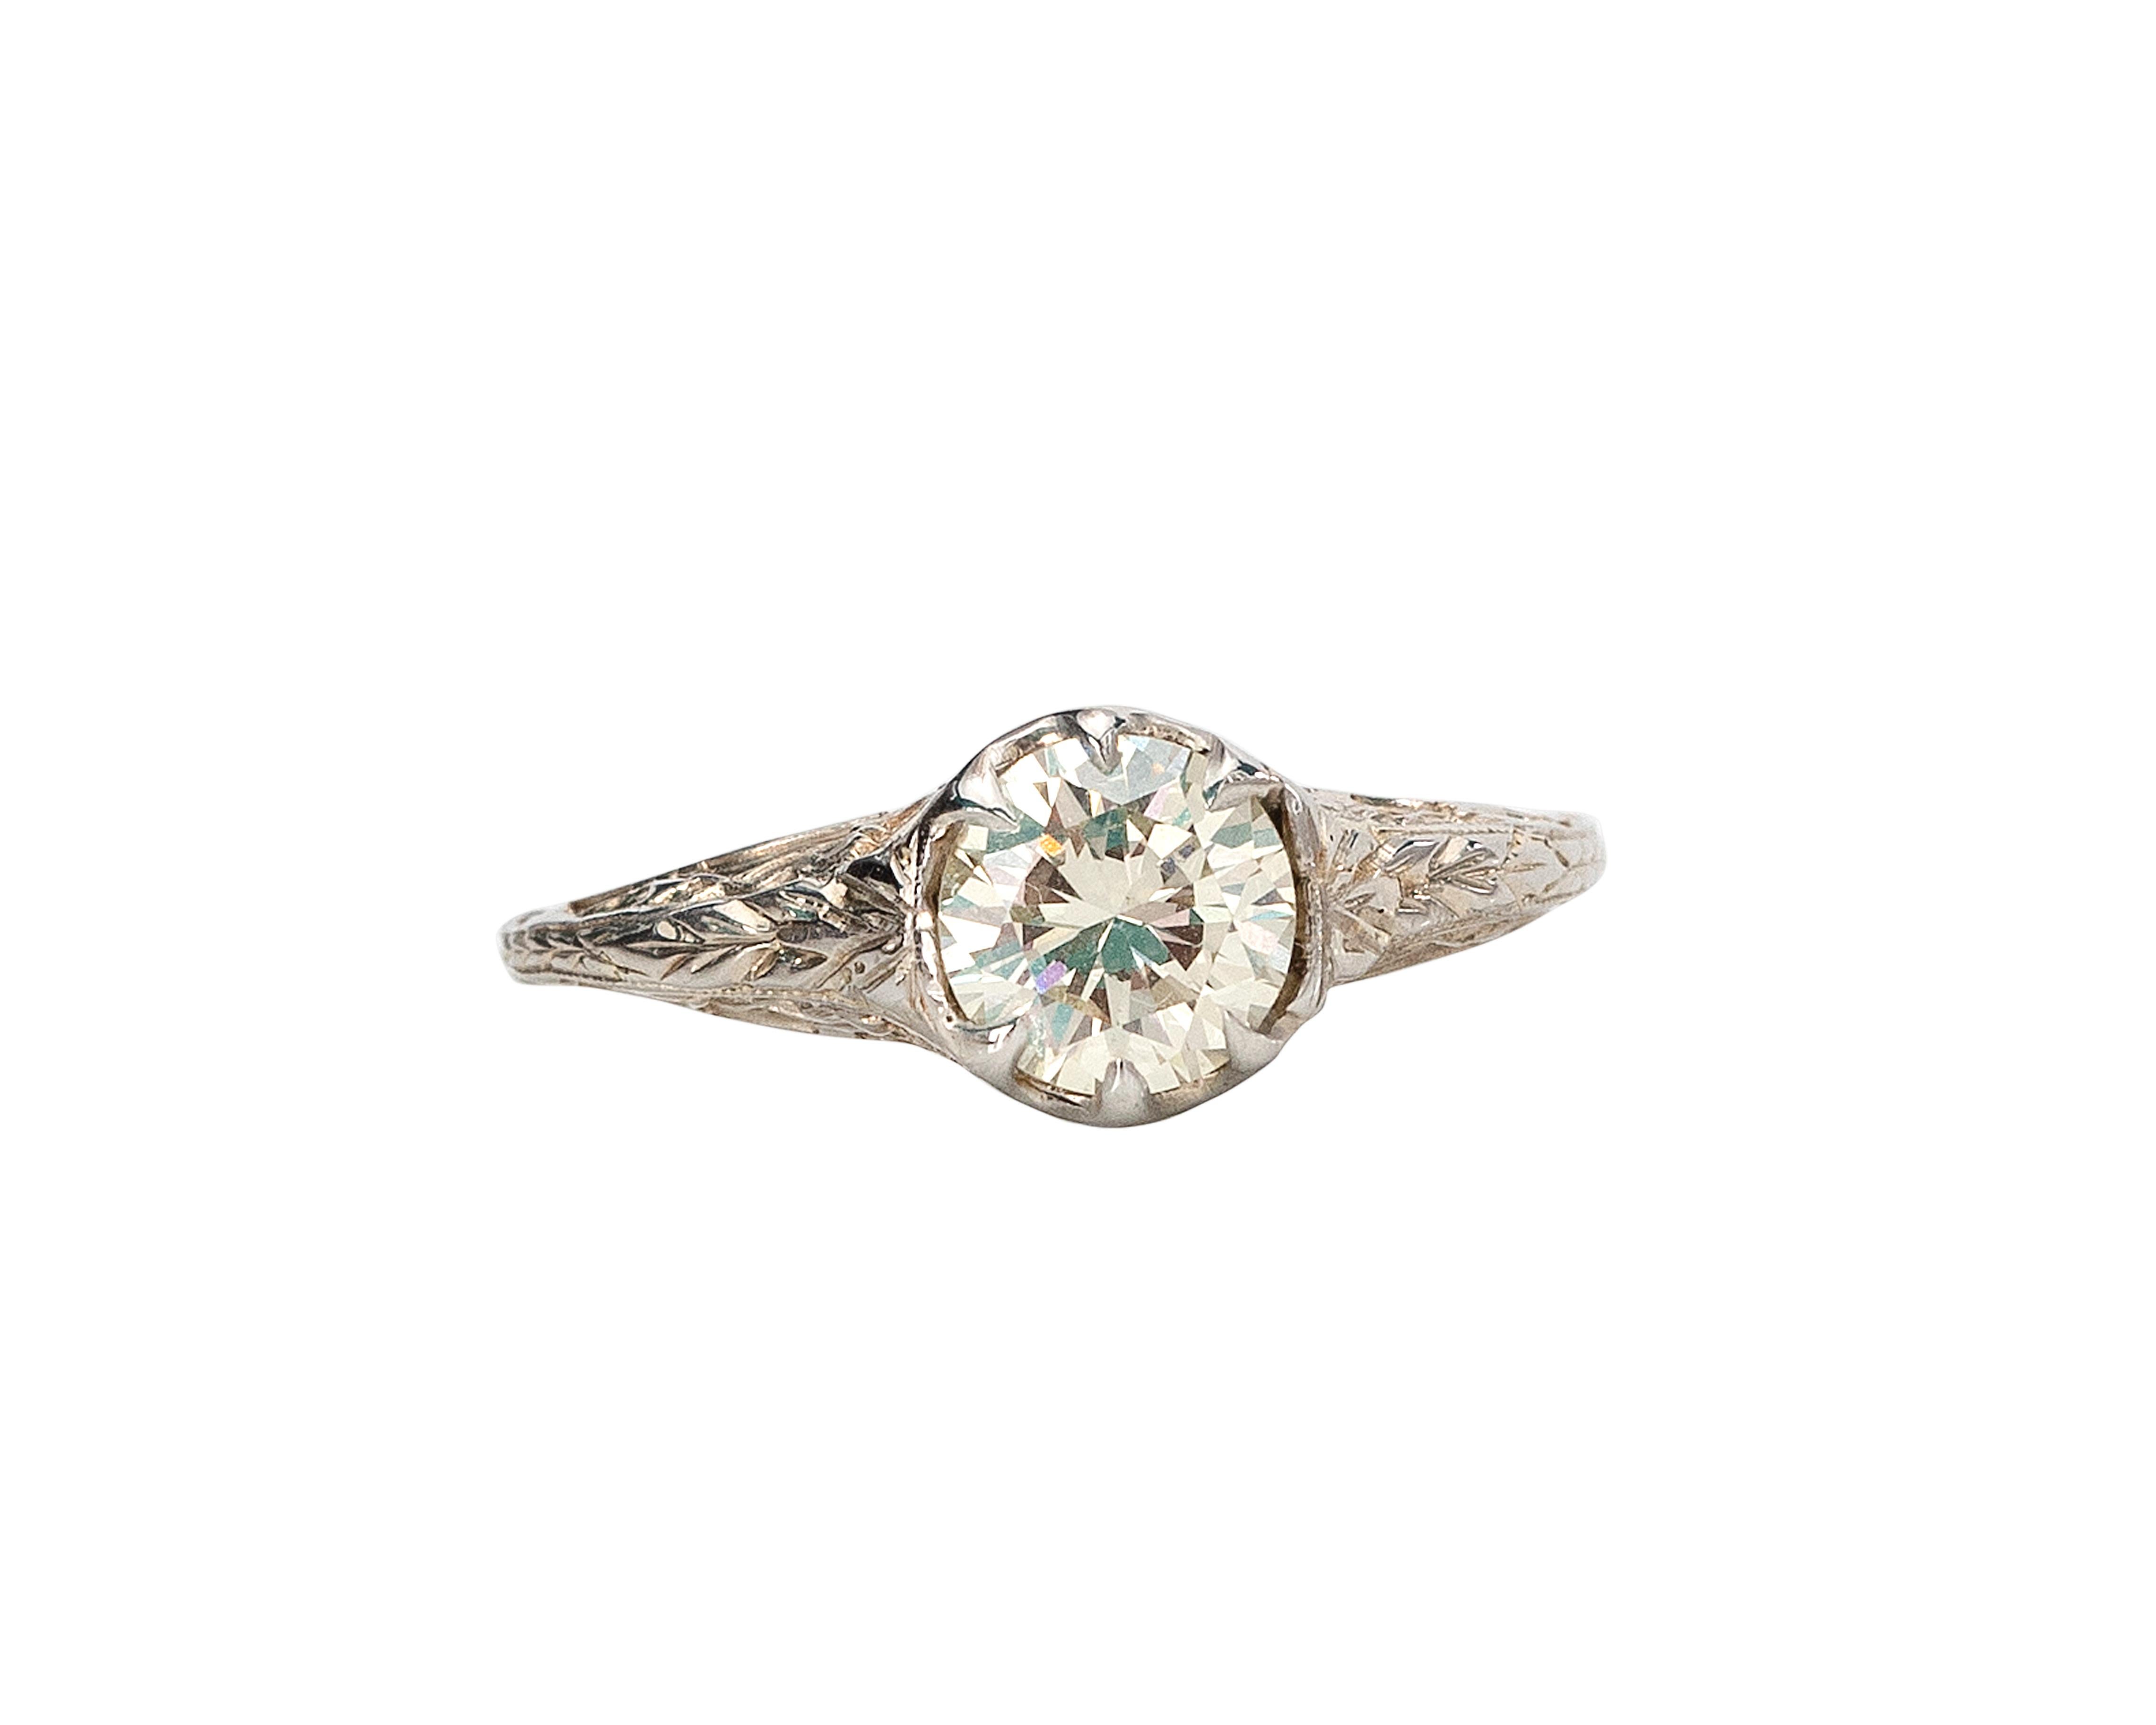 This ring is a lovely example of a vintage diamond ring crafted by Belais Bros in a classic Art Deco style. The 1.05 carat Old European cut diamond is a top clarity with a sparkling nearly perfect VS grade and a warm body color that is very typical